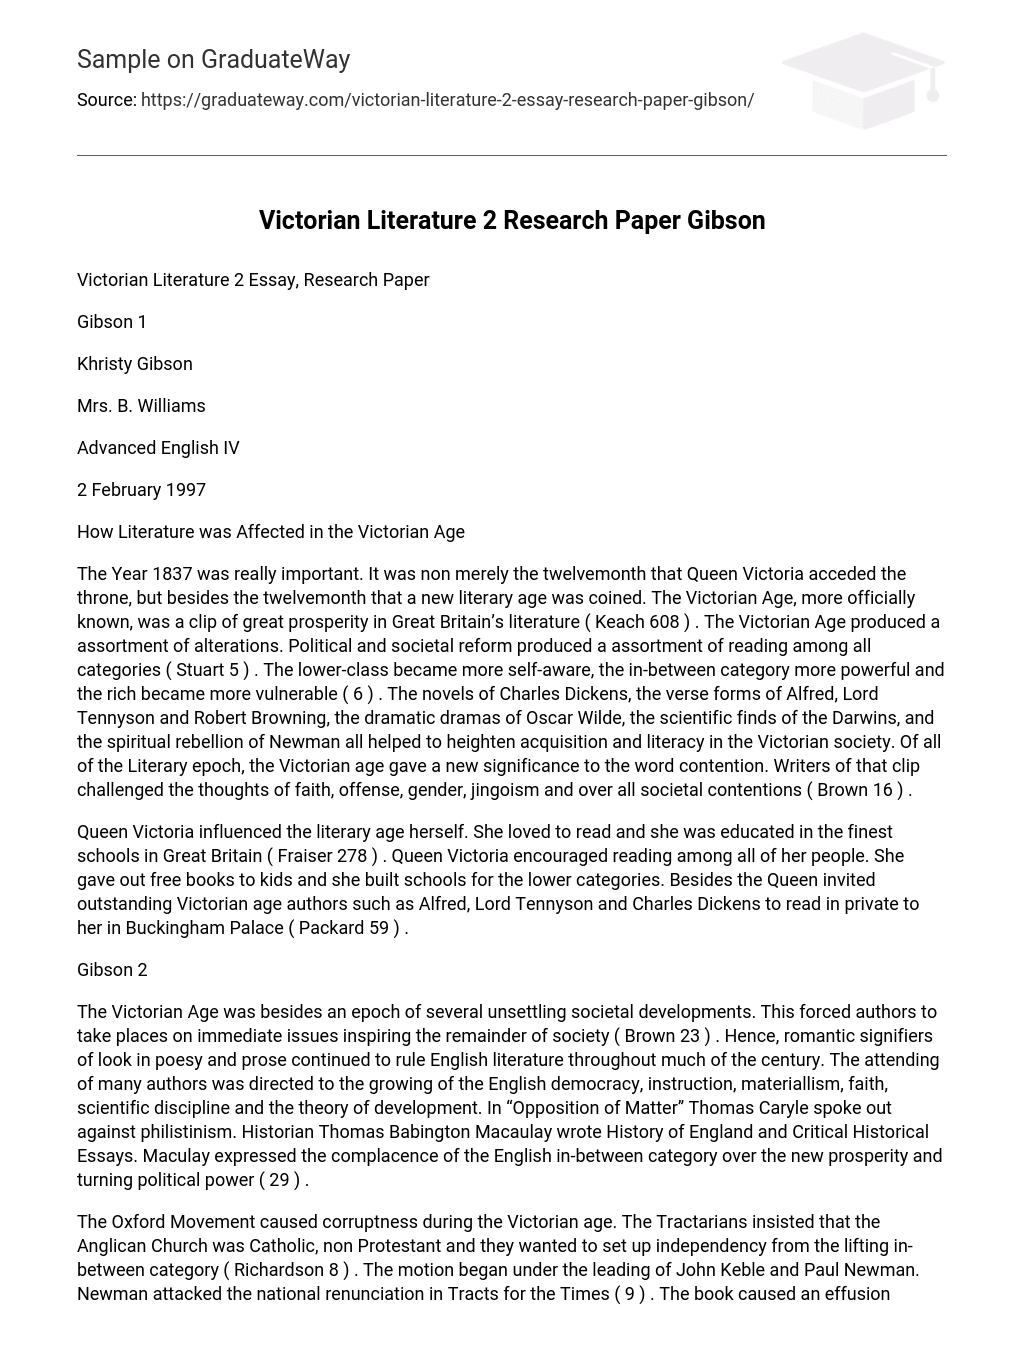 Victorian Literature 2 Research Paper Gibson